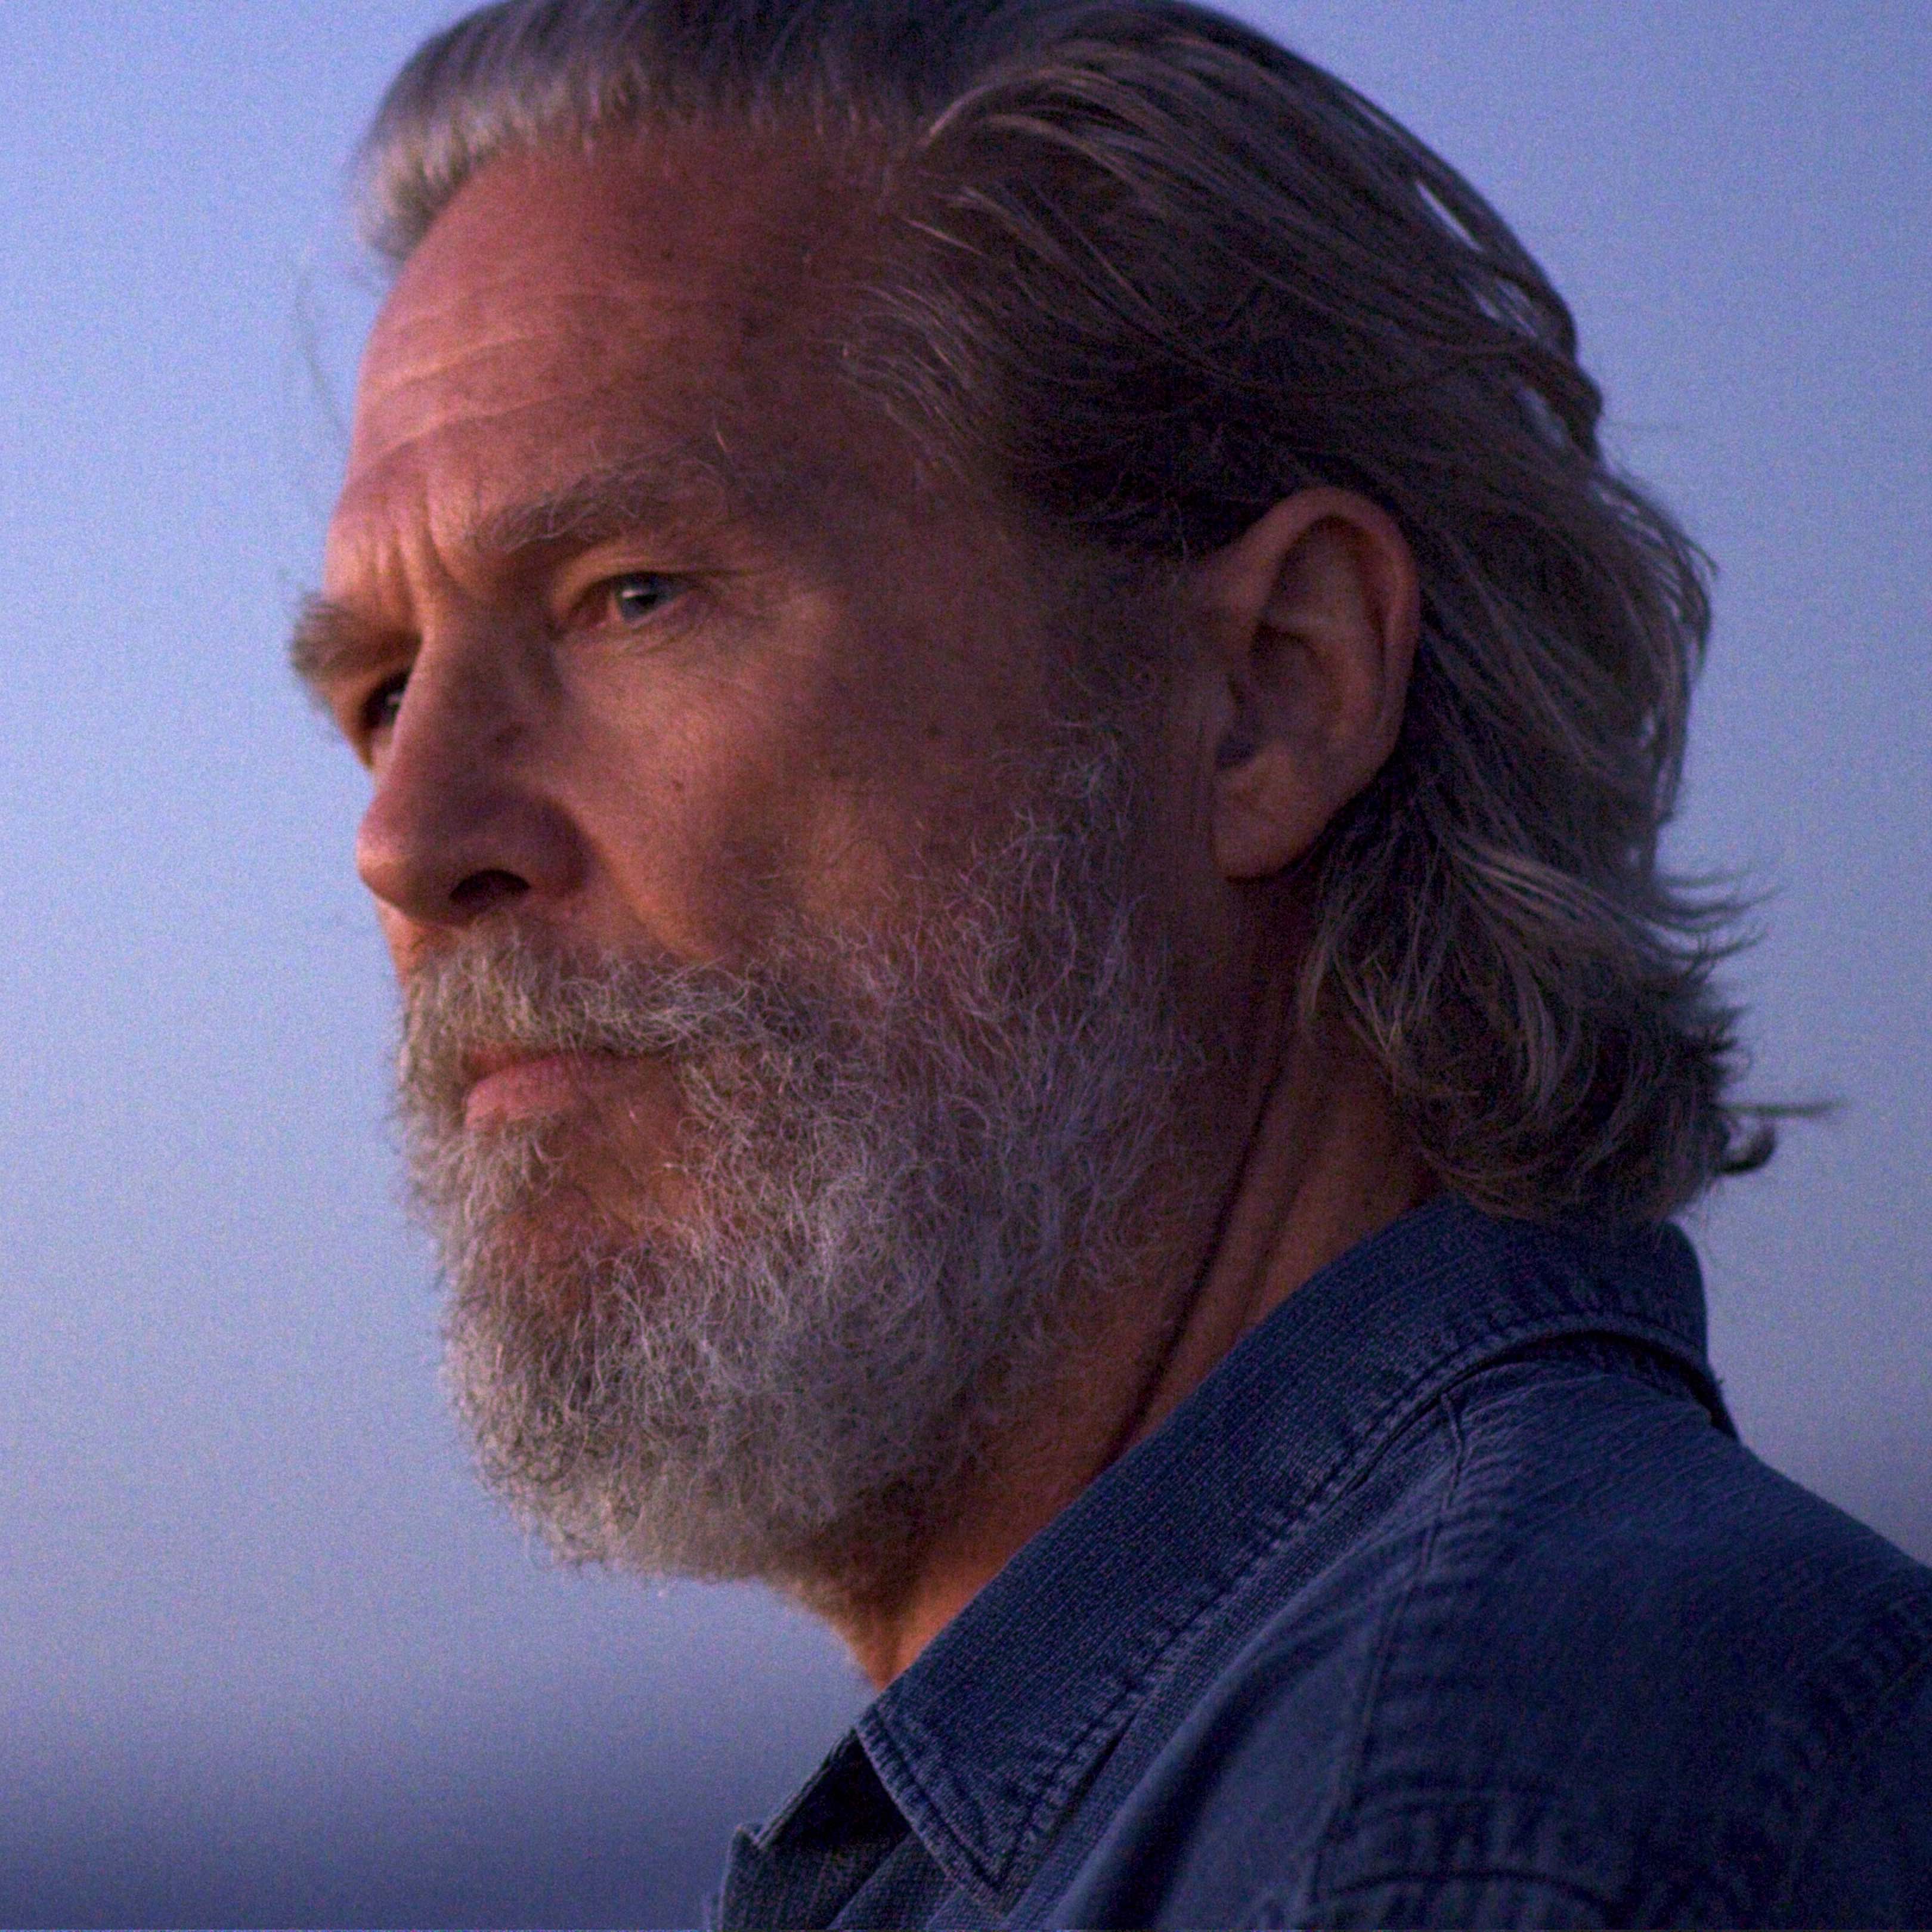 FLOOD - Jeff Bridges Is Set to Play “The Old Man” in New FX CIA Drama